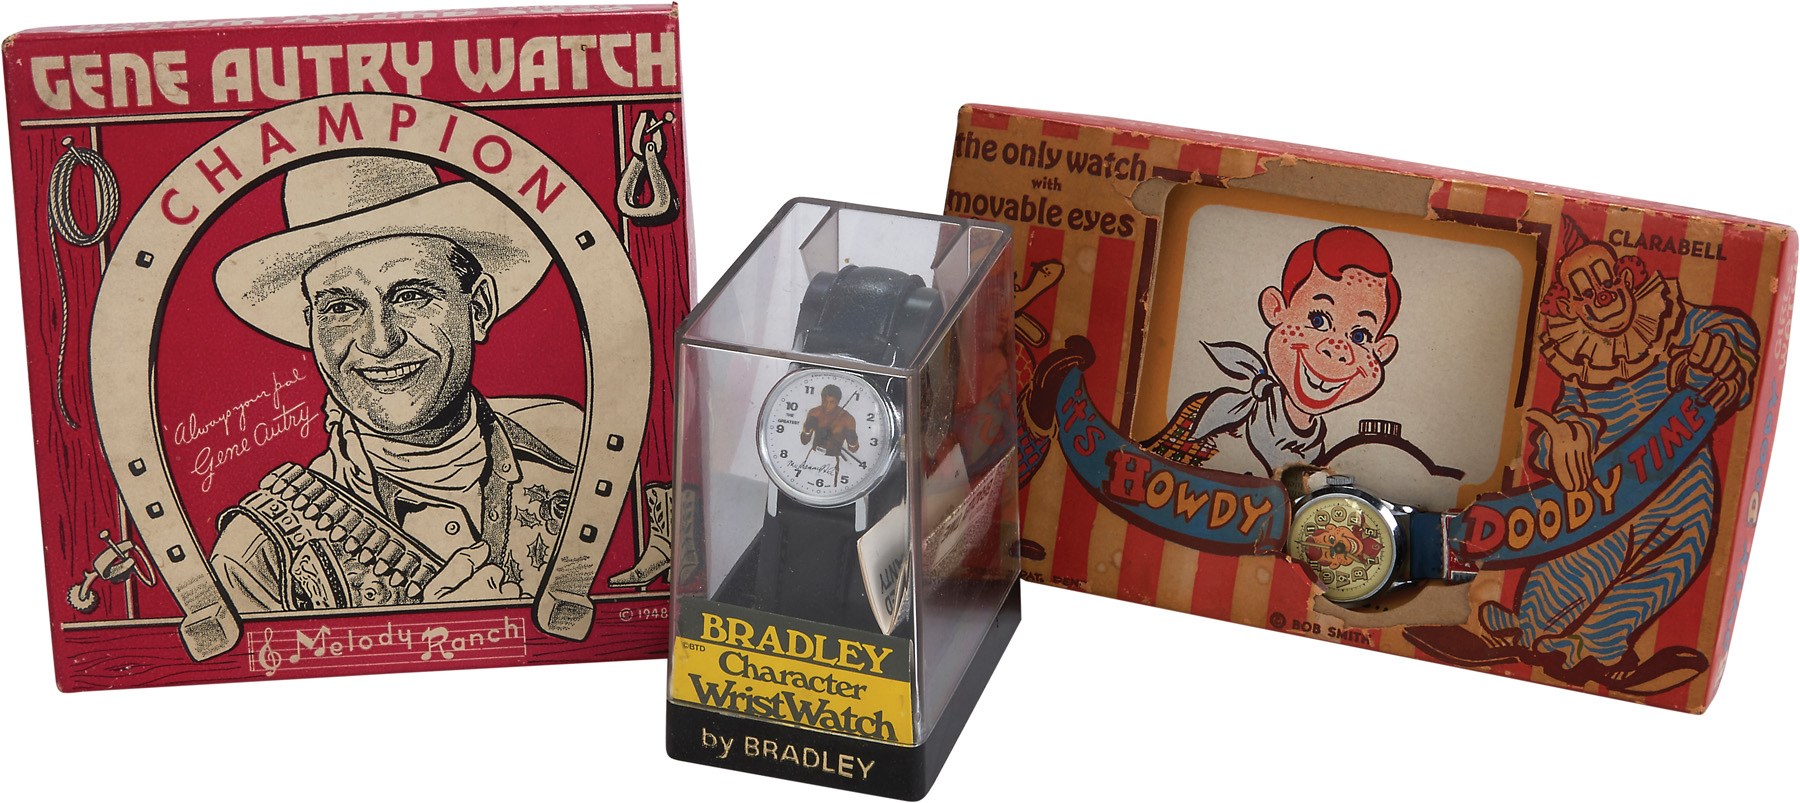 Rock And Pop Culture - Three Character Watches in Original Boxes